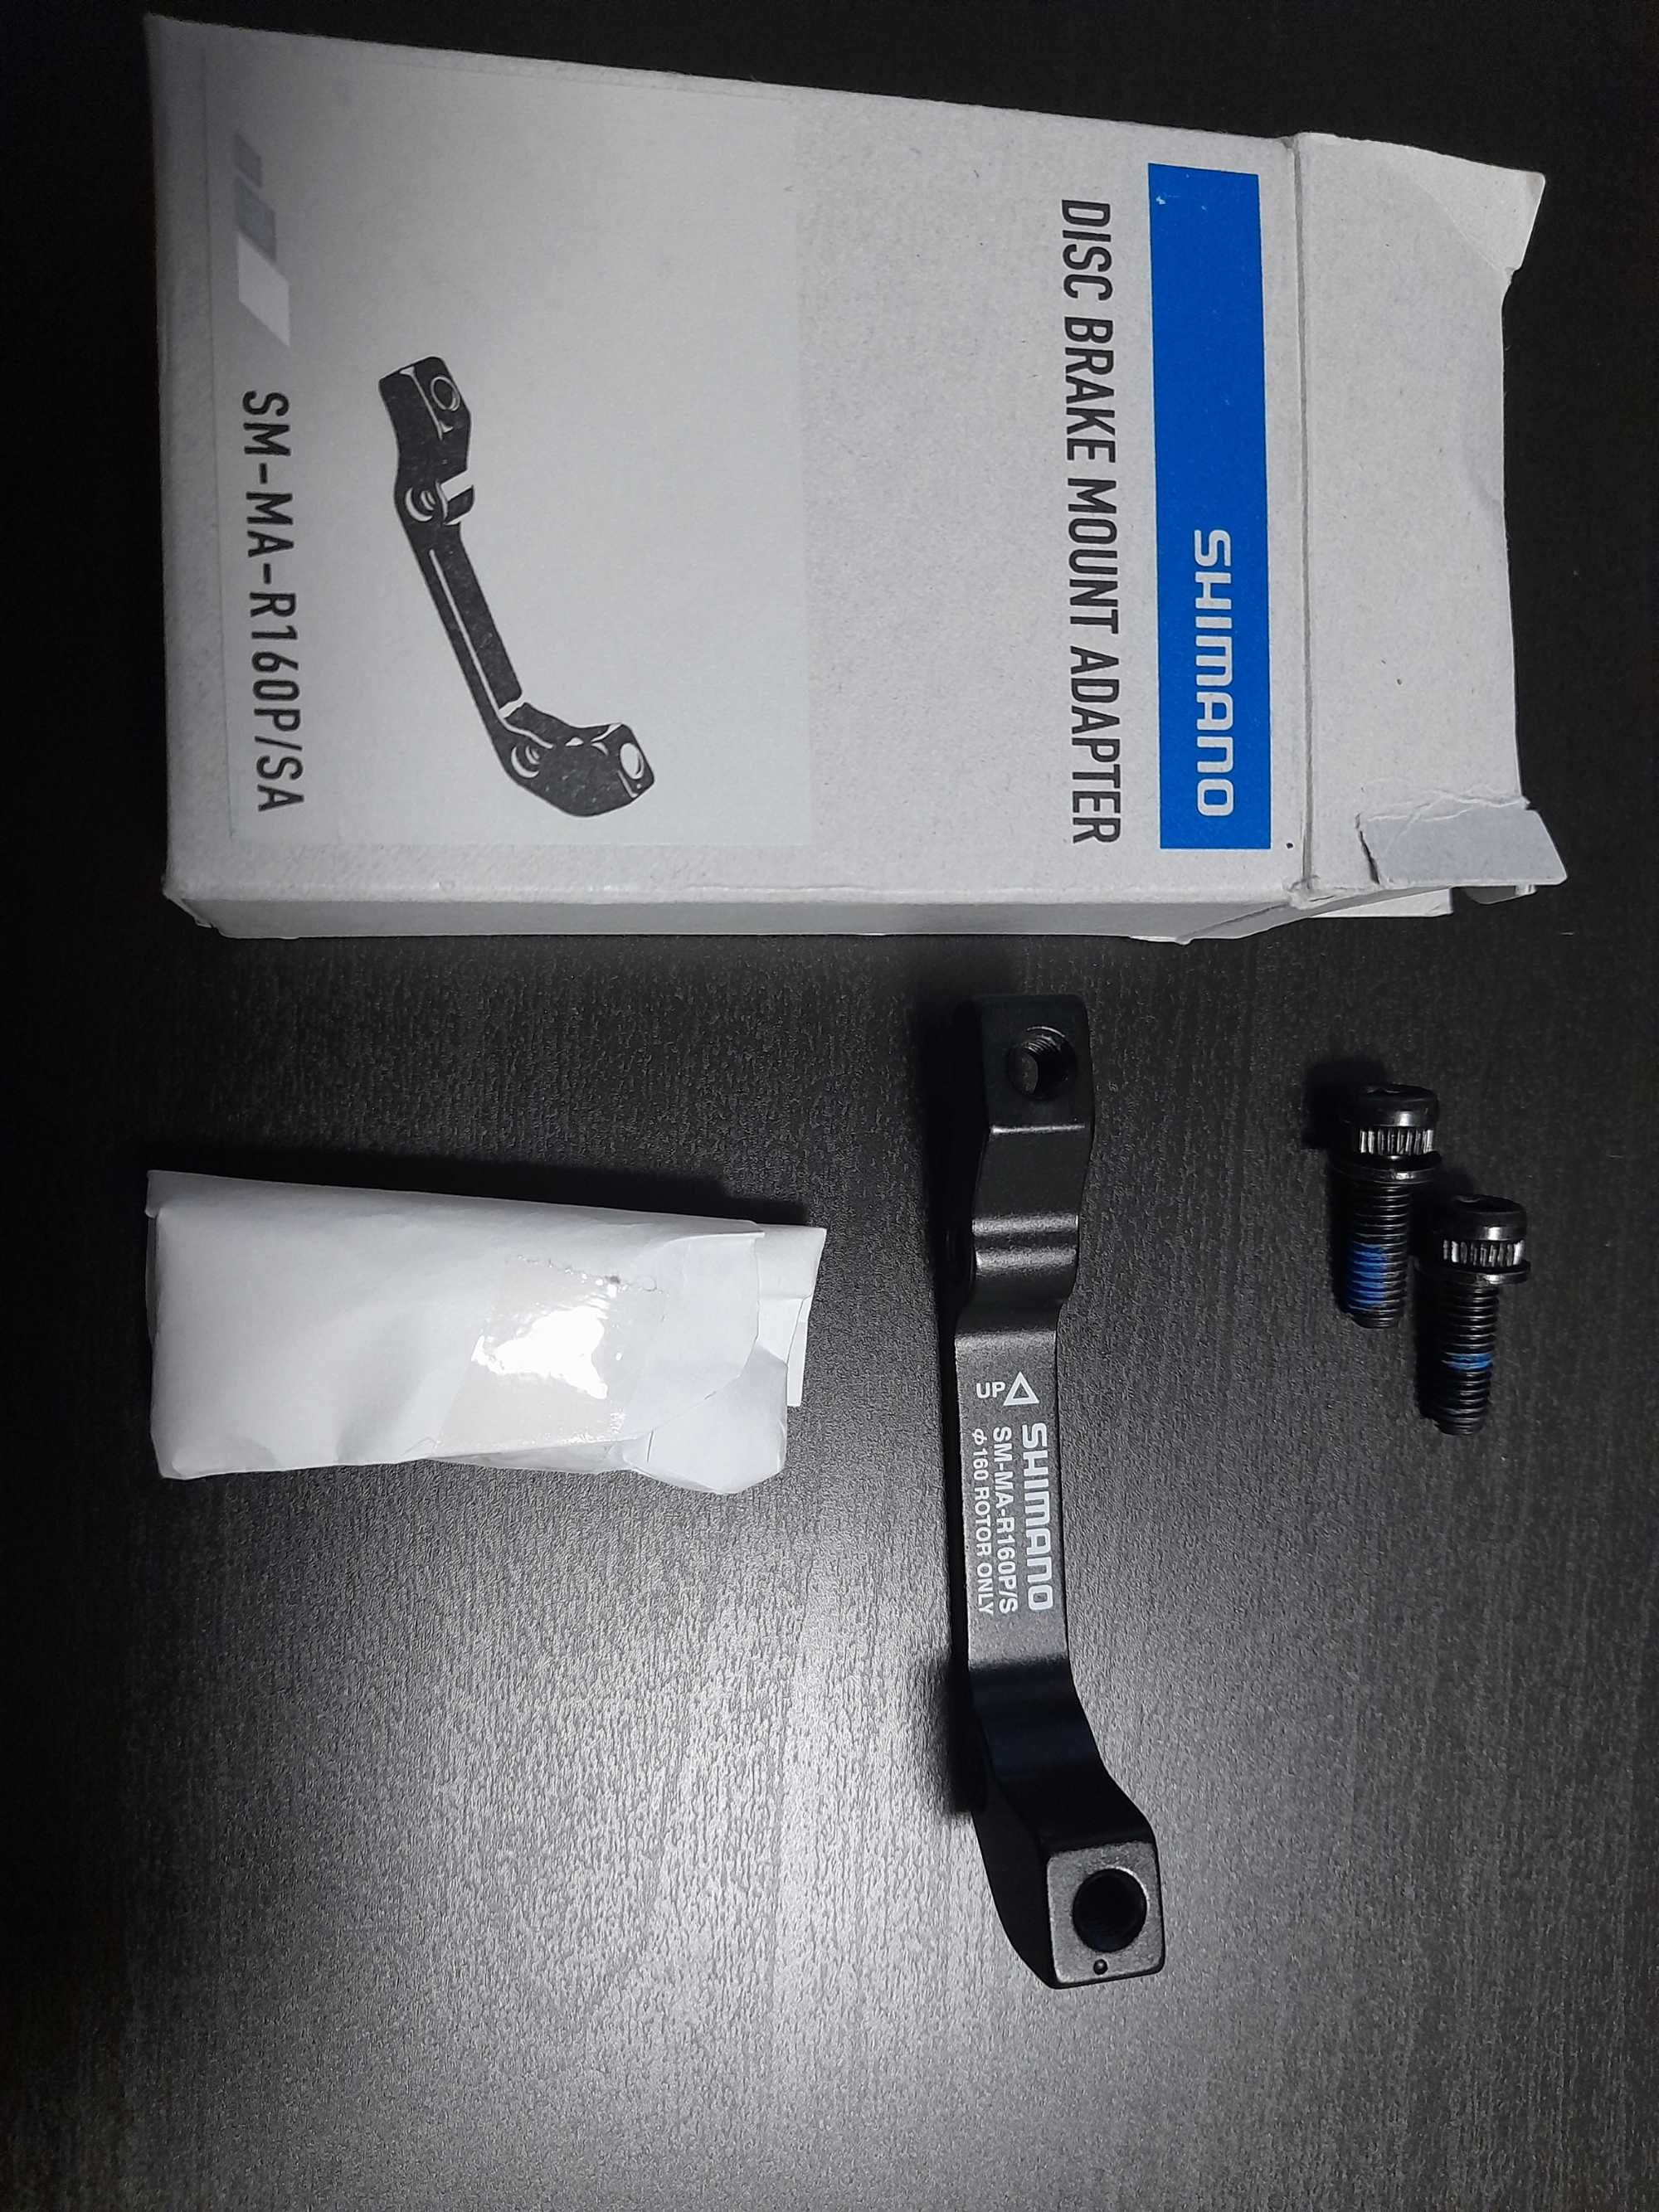 Adaptor Shimano is to pm 160